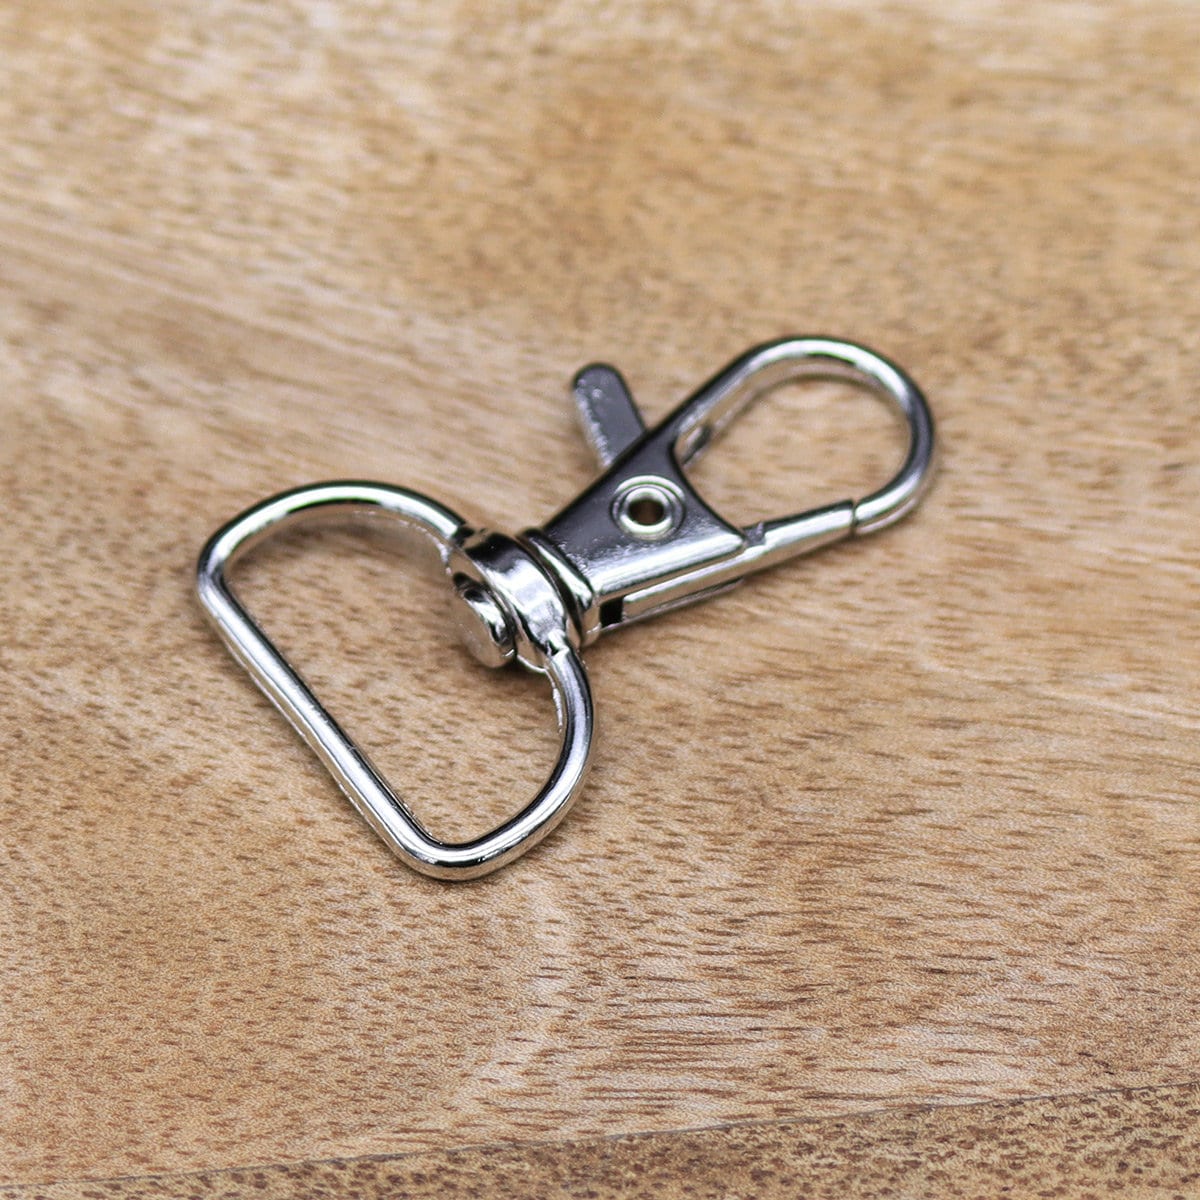 Key Ring Clips 20 Sets Swivel Snap Hooks with Key Rings Small Keyring Rings  Hoops with Lobster Claw Buckle Keys Attachments for Keys Organization 